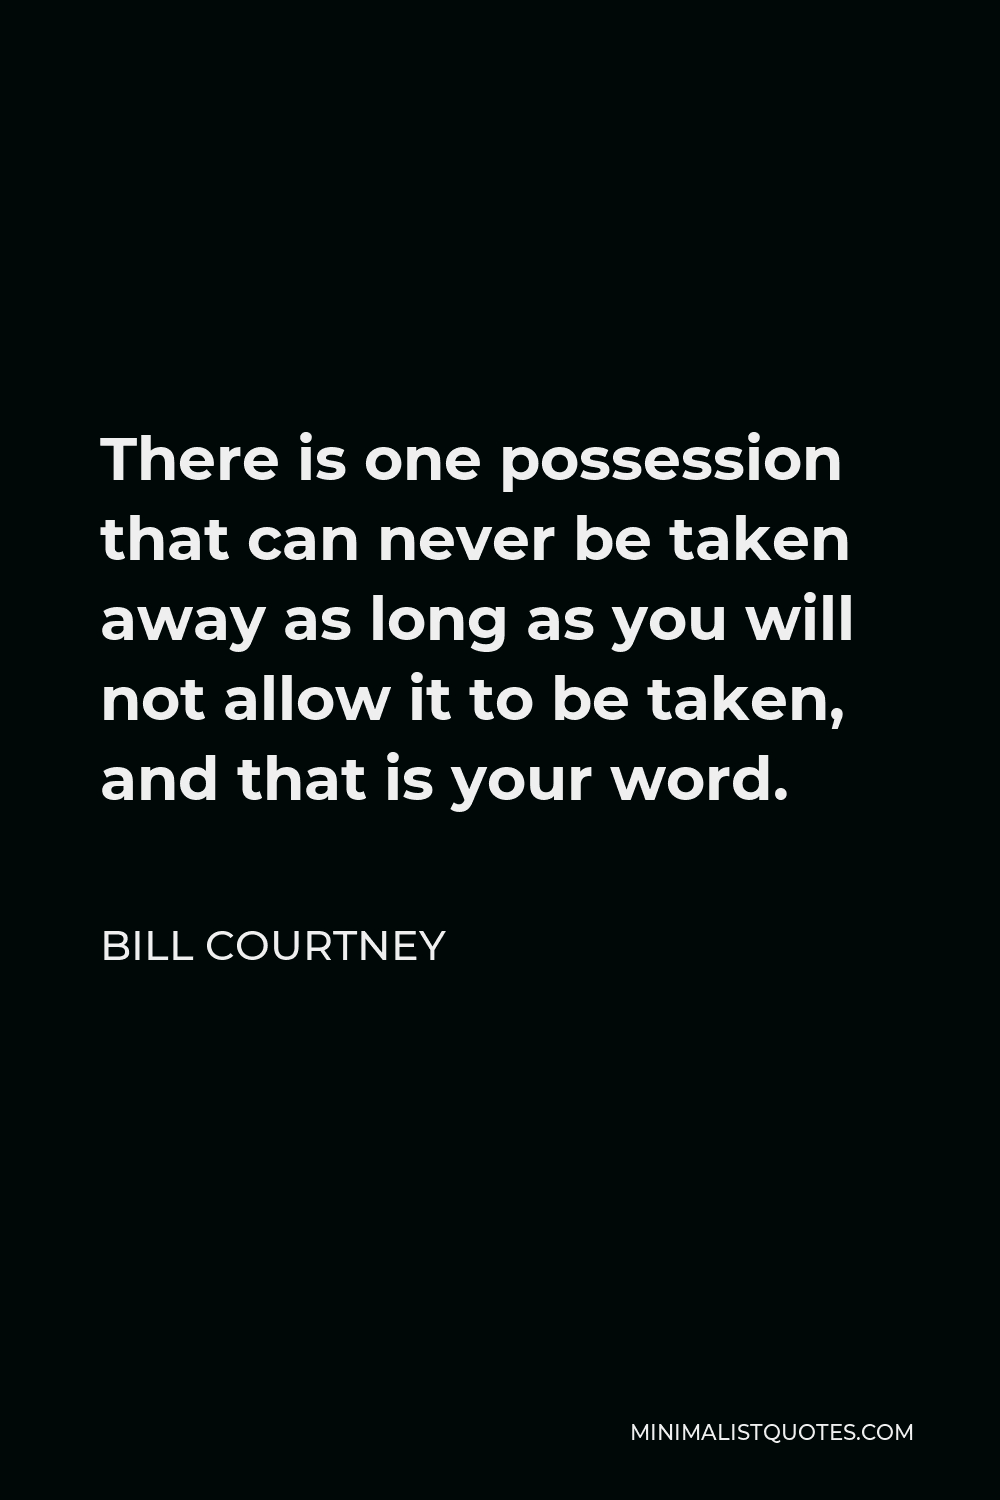 Bill Courtney Quote - There is one possession that can never be taken away as long as you will not allow it to be taken, and that is your word.